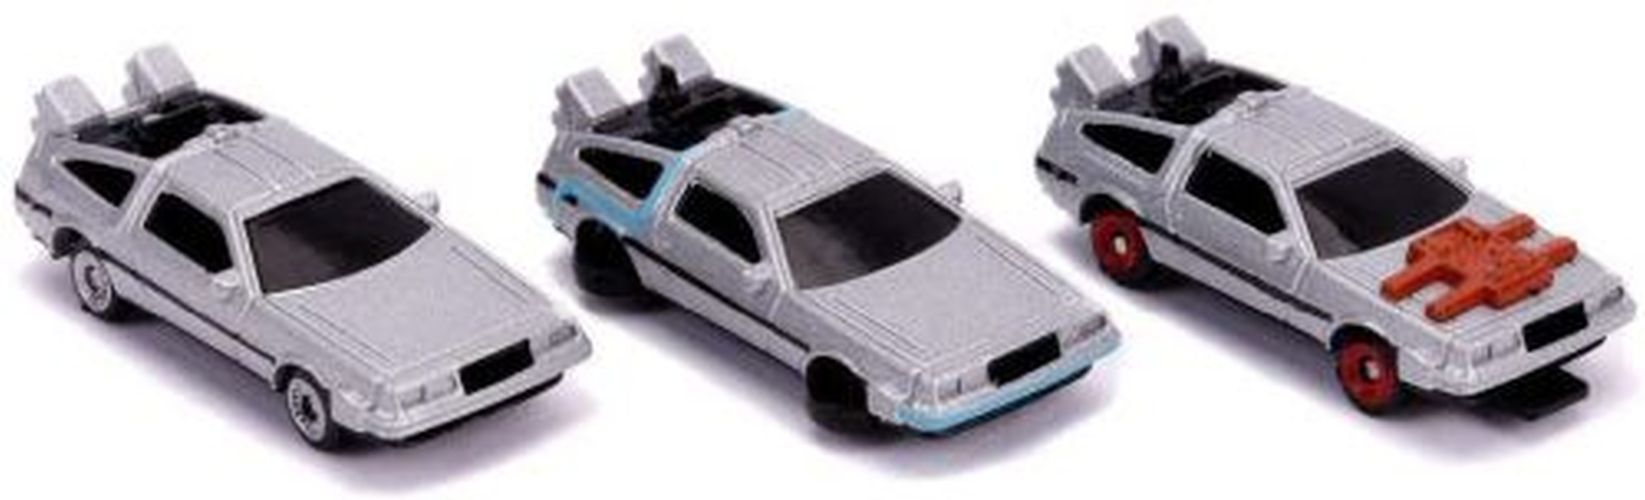 JADA TOYS Back To The Future Nano Hollywood Rides 3 Piece Vehicle Set - DIE CAST